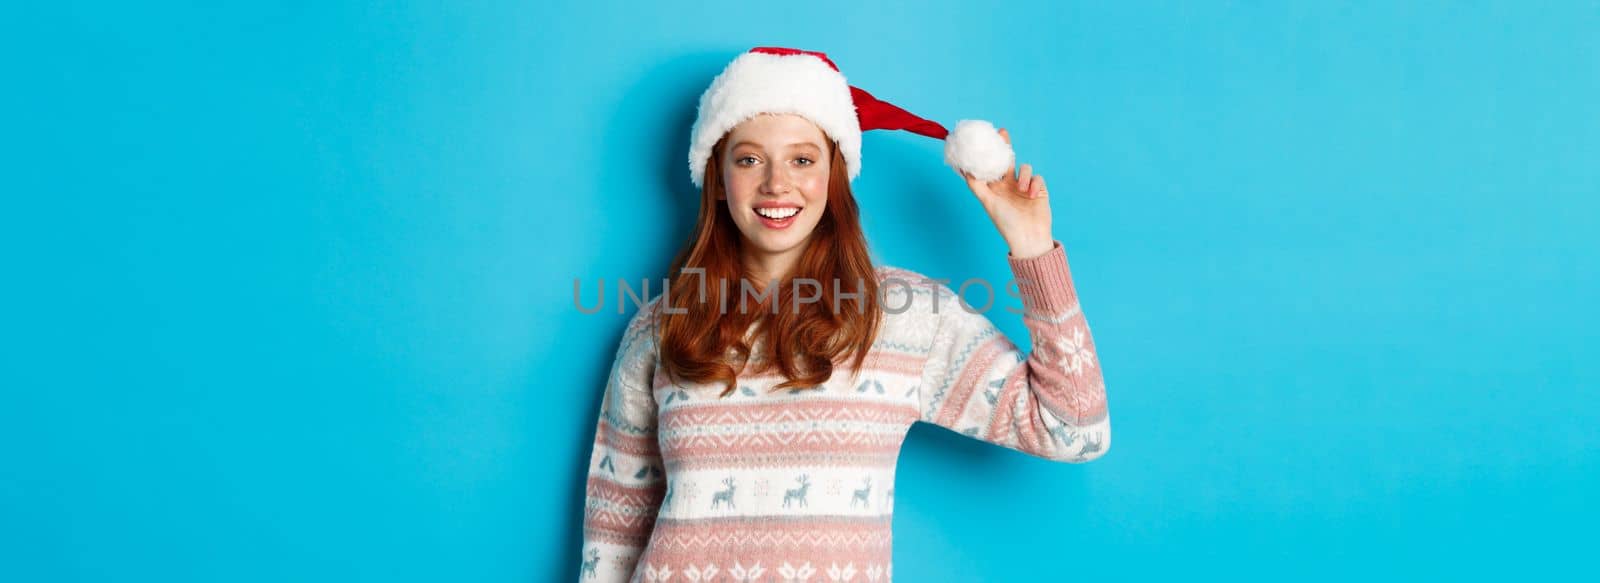 Winter and Christmas Eve concept. Cute redhead girl in Santa hat smiling at camera, standing in sweater against blue backgroudn.